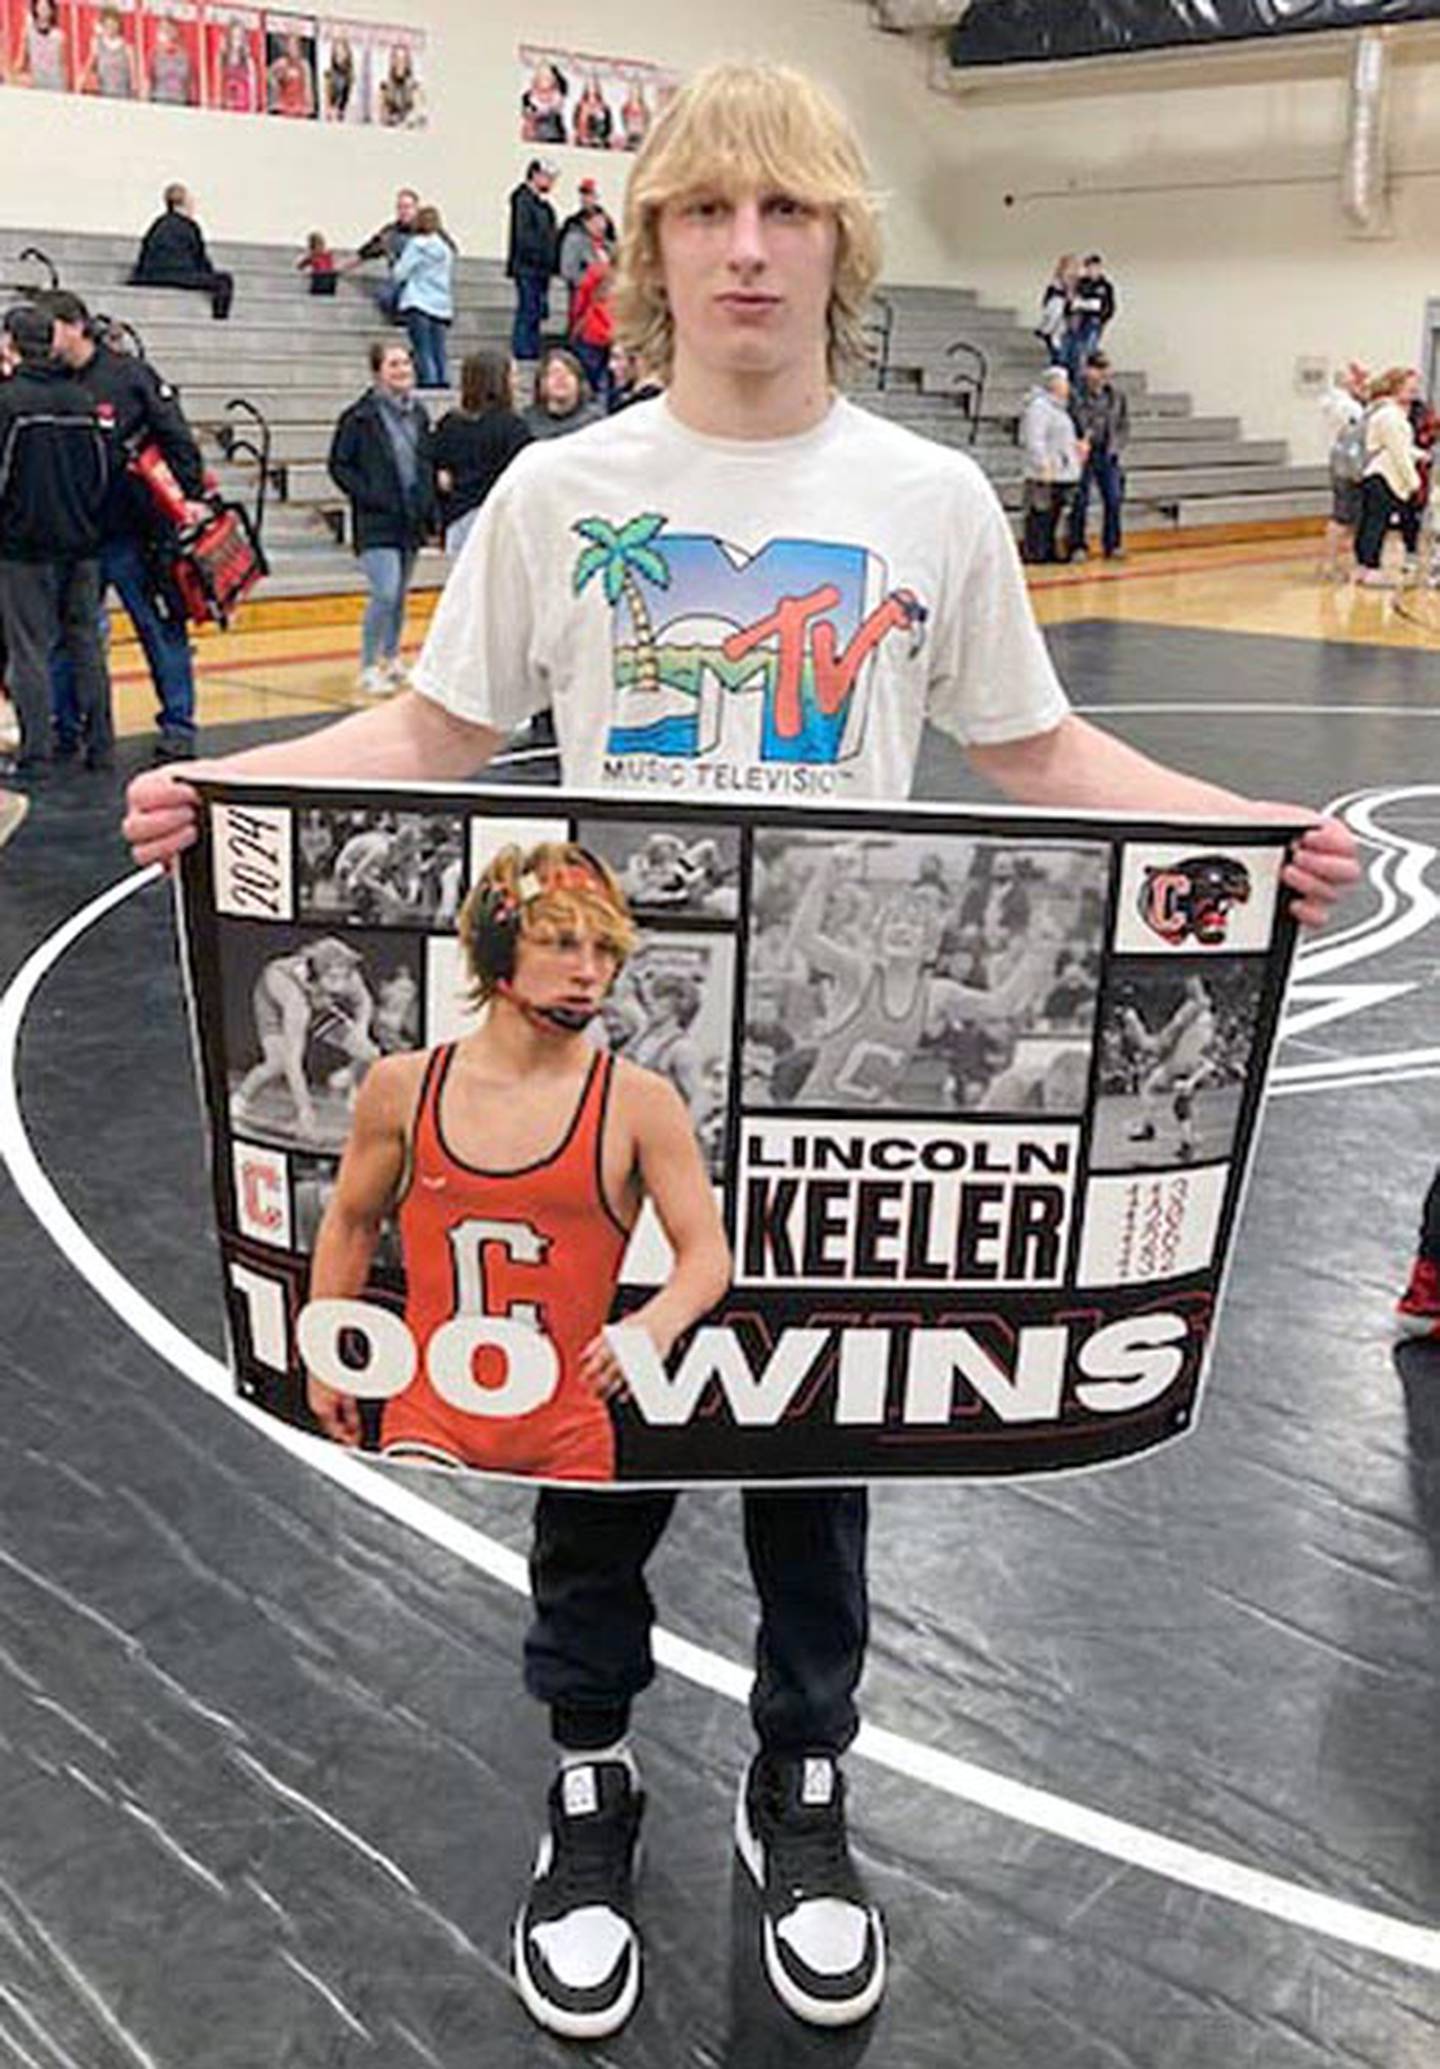 Creston 132-pounder Lincoln Keeler became the seventh member of this Creston team to reach 100 career wins Thursday night.